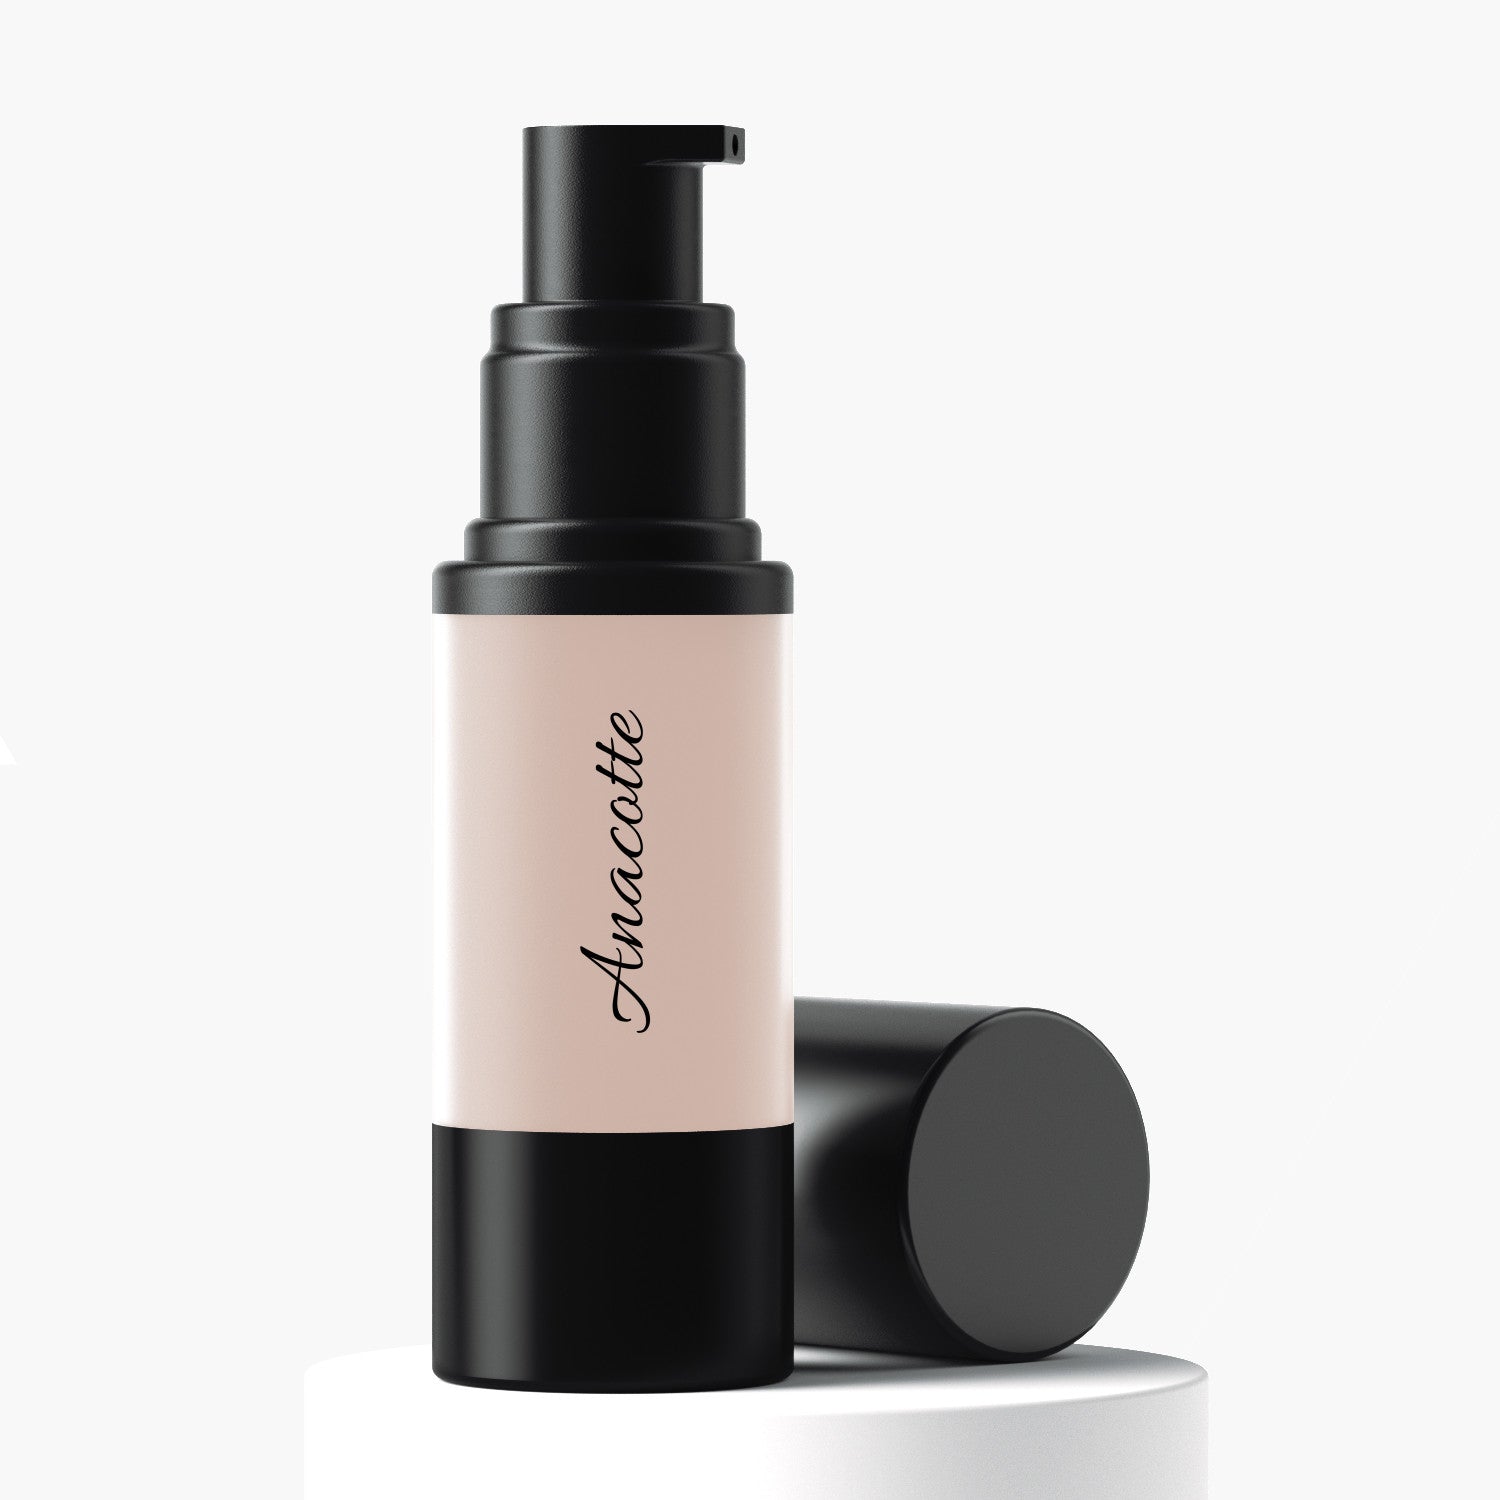 Anacotte Anti-aging Oil-Free Foundation Makeup